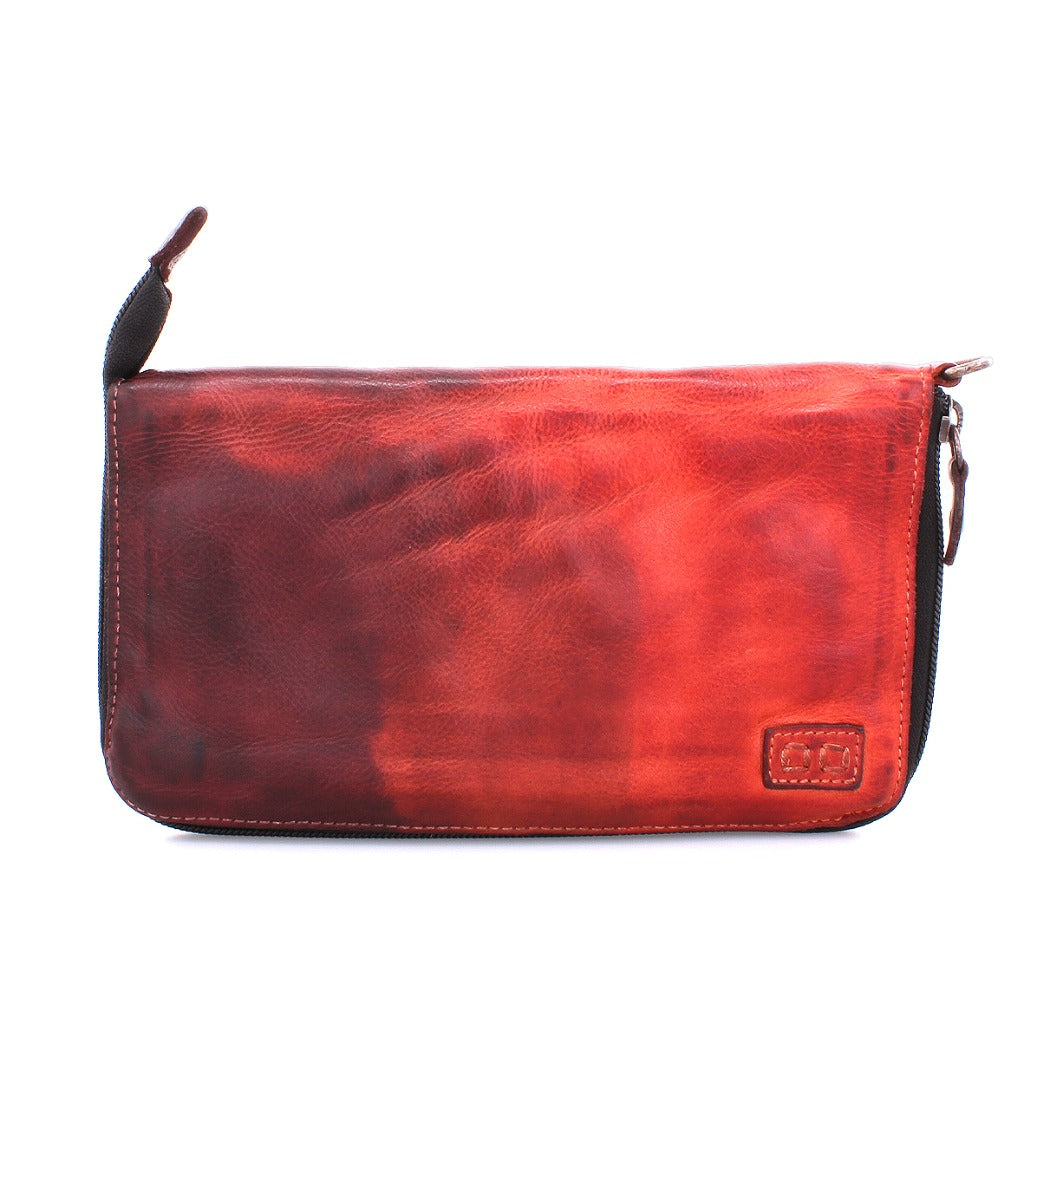 Bed Stu Templeton II red leather multi-functional pure leather clutch.